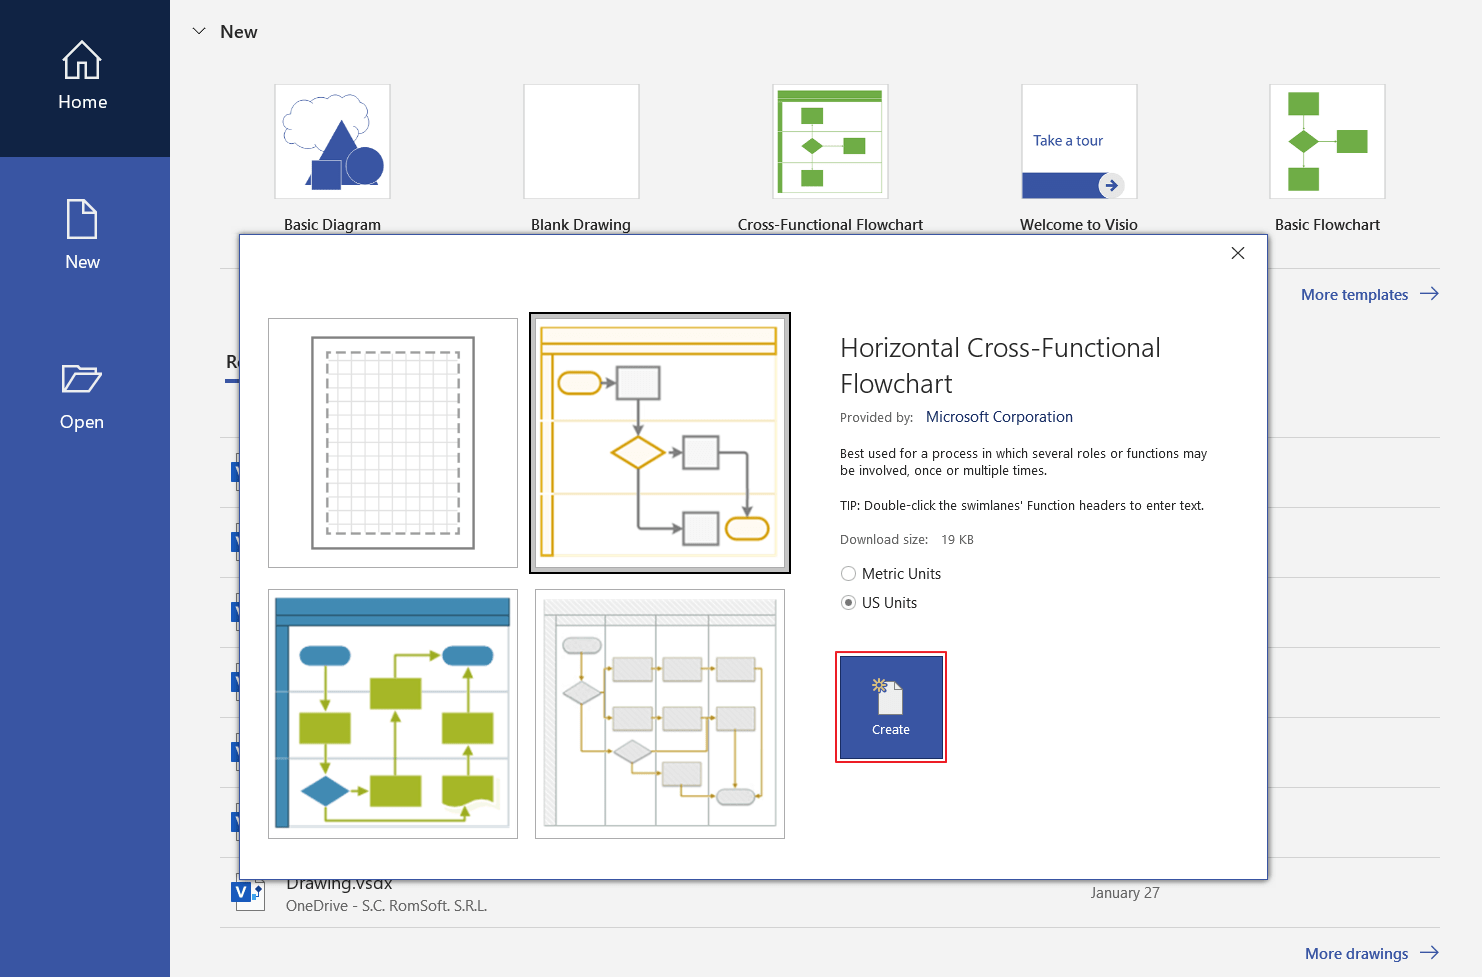 Select the Cross-Functional Flowchart Template